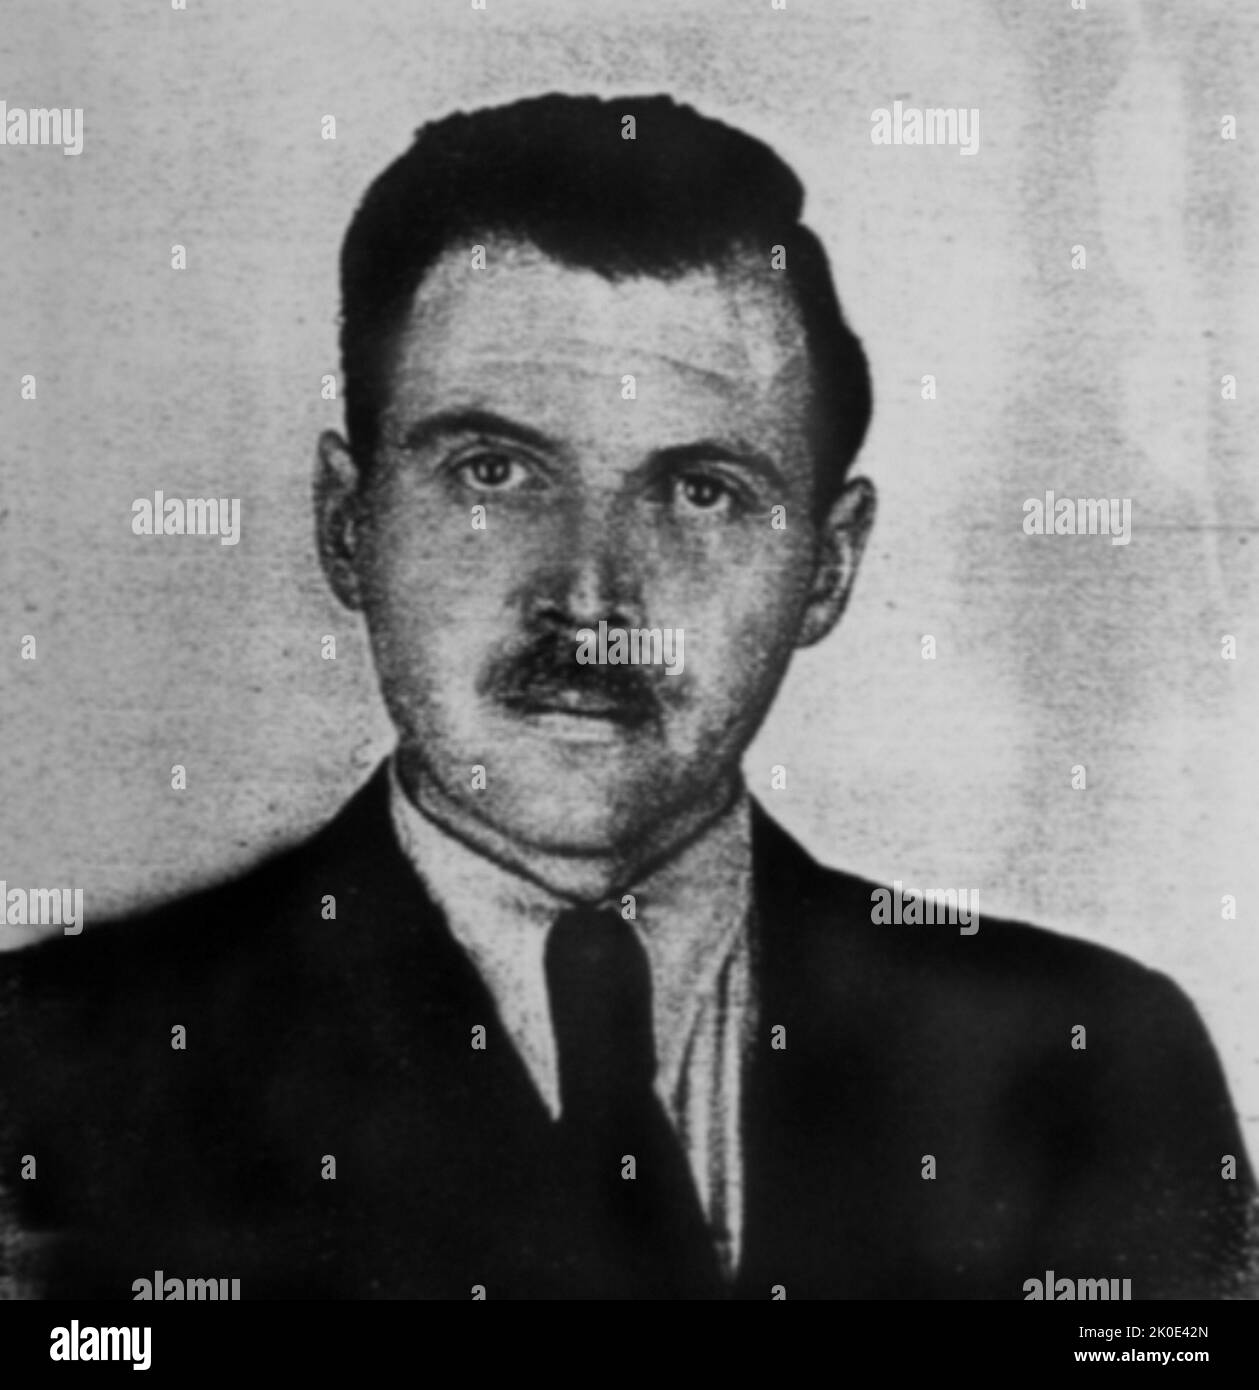 Josef Mengele (1911-1979), German SS officer. Photo taken by a police photographer in 1956 in Buenos Aires for Mengele's Argentine identification document. Stock Photo